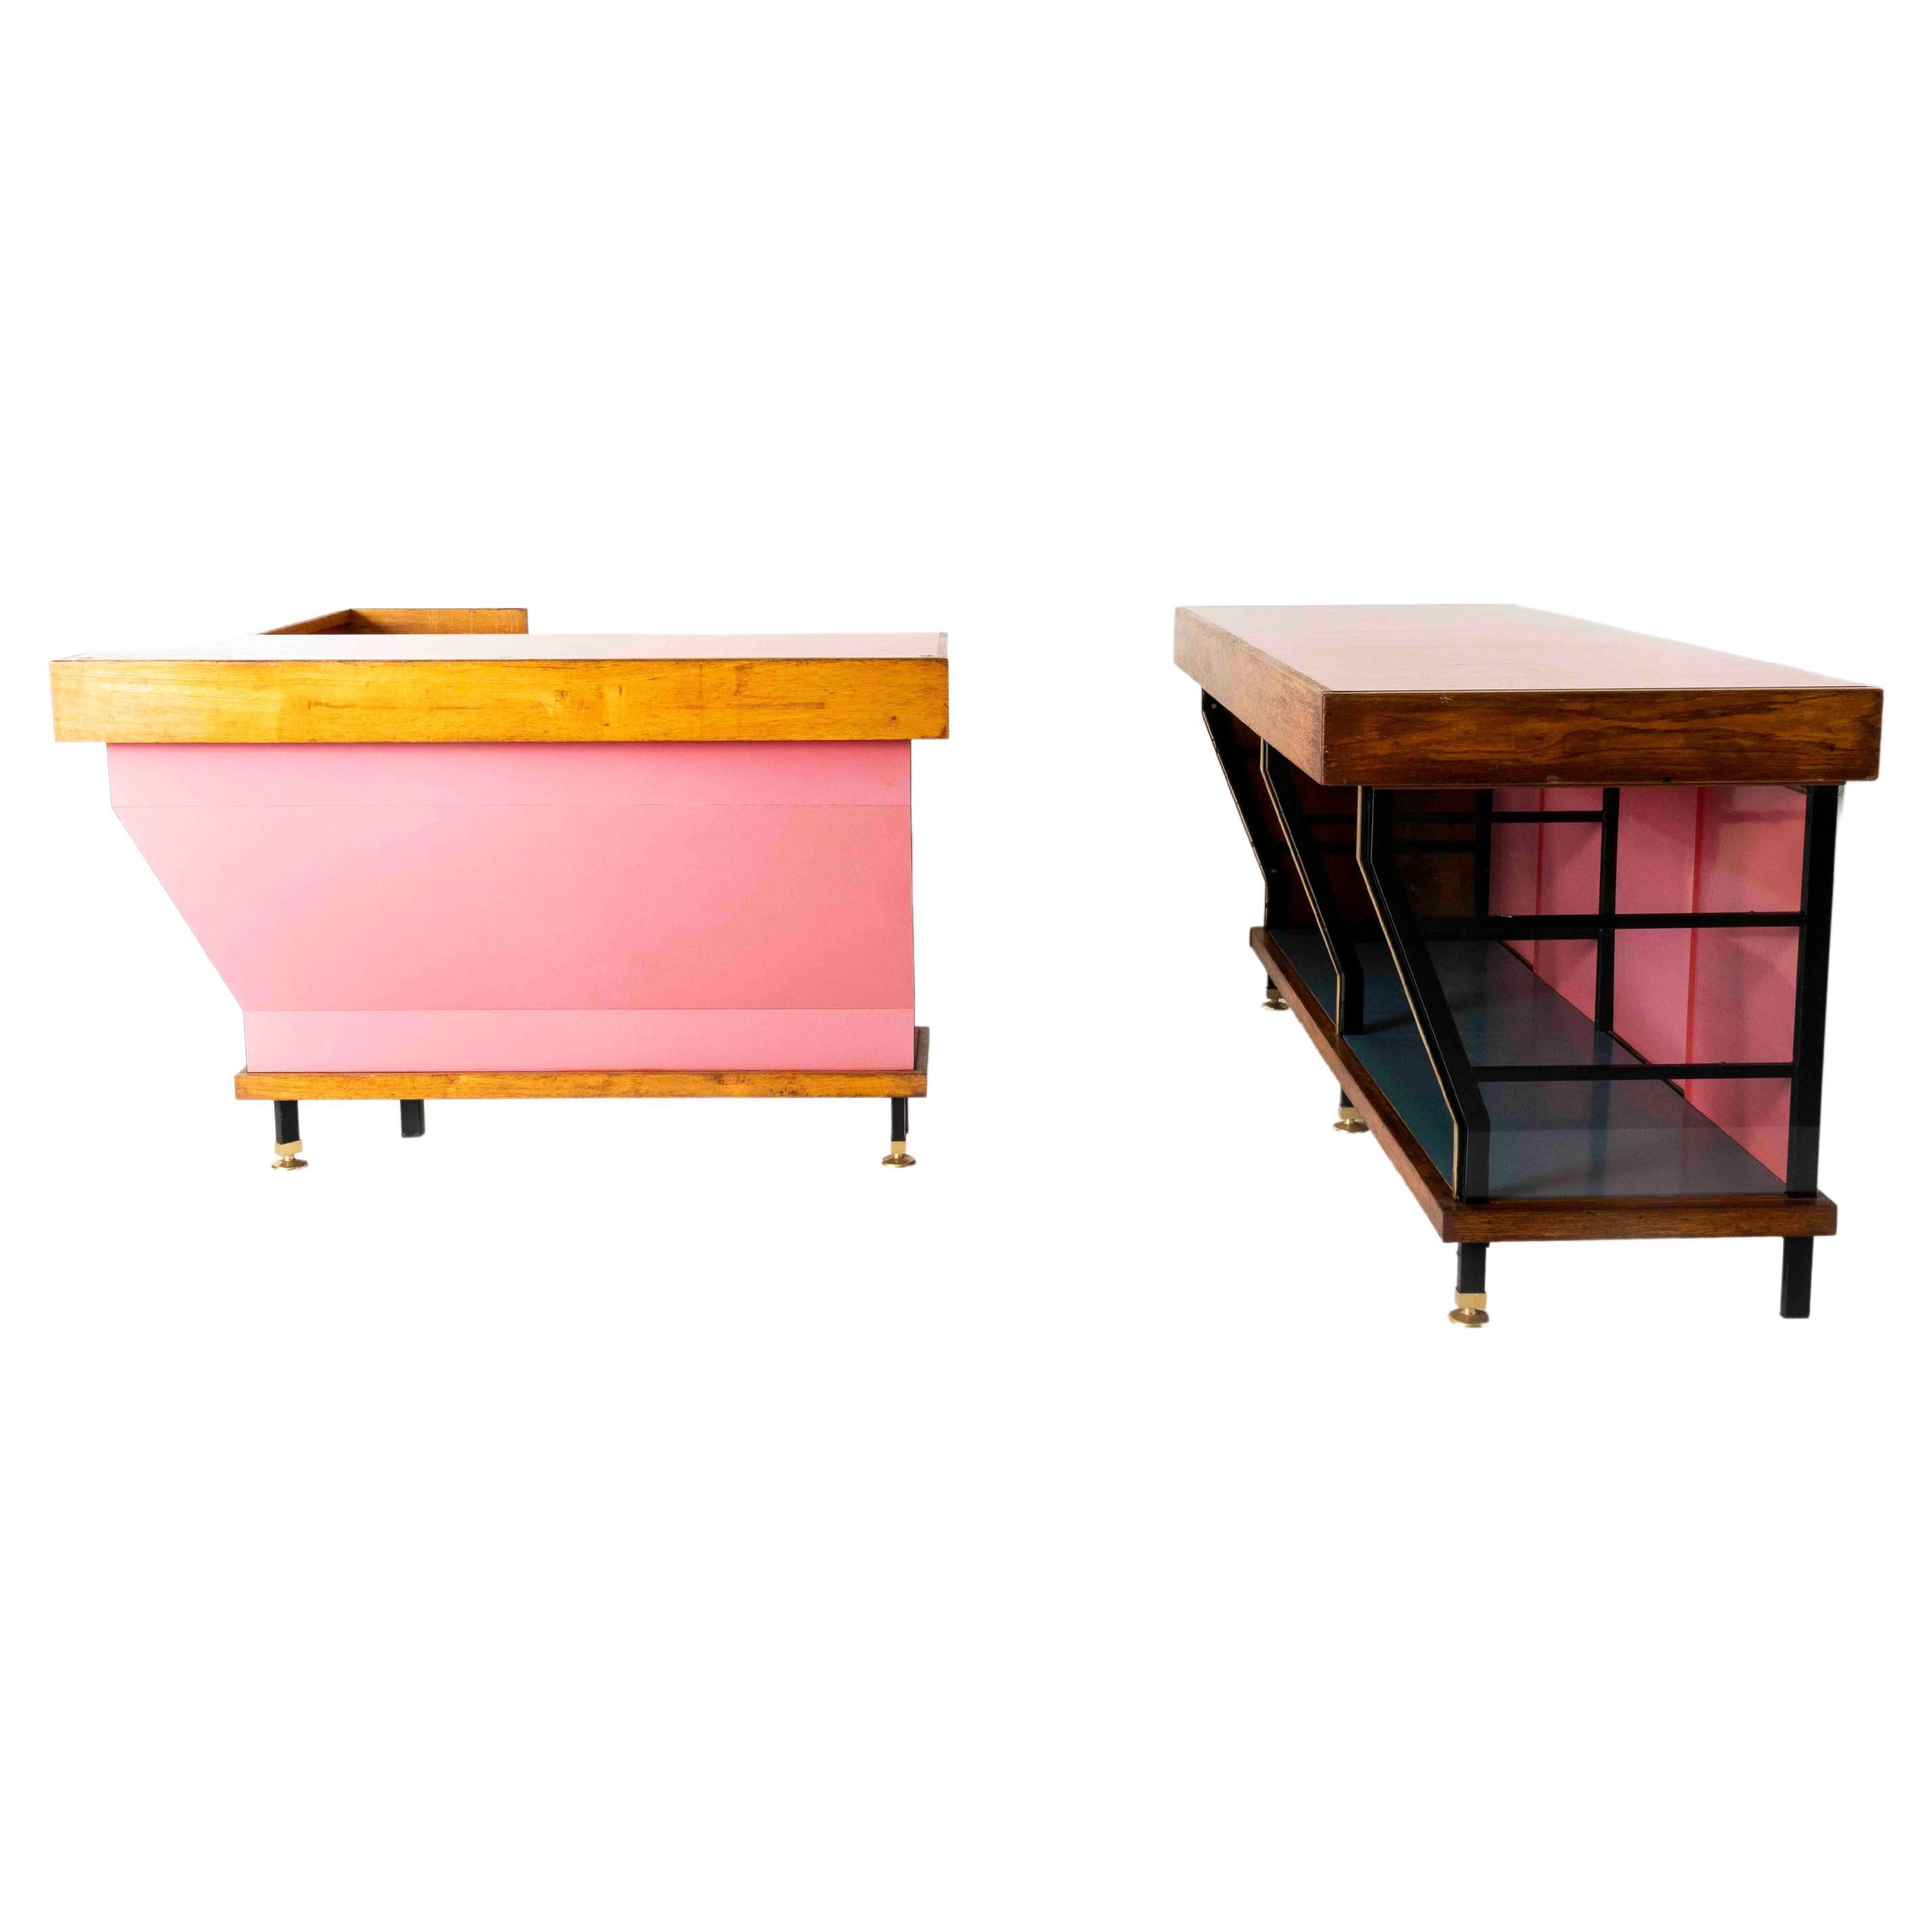 Large Italian Vintage Shop Counter in Pink and Blue, ca 1960s